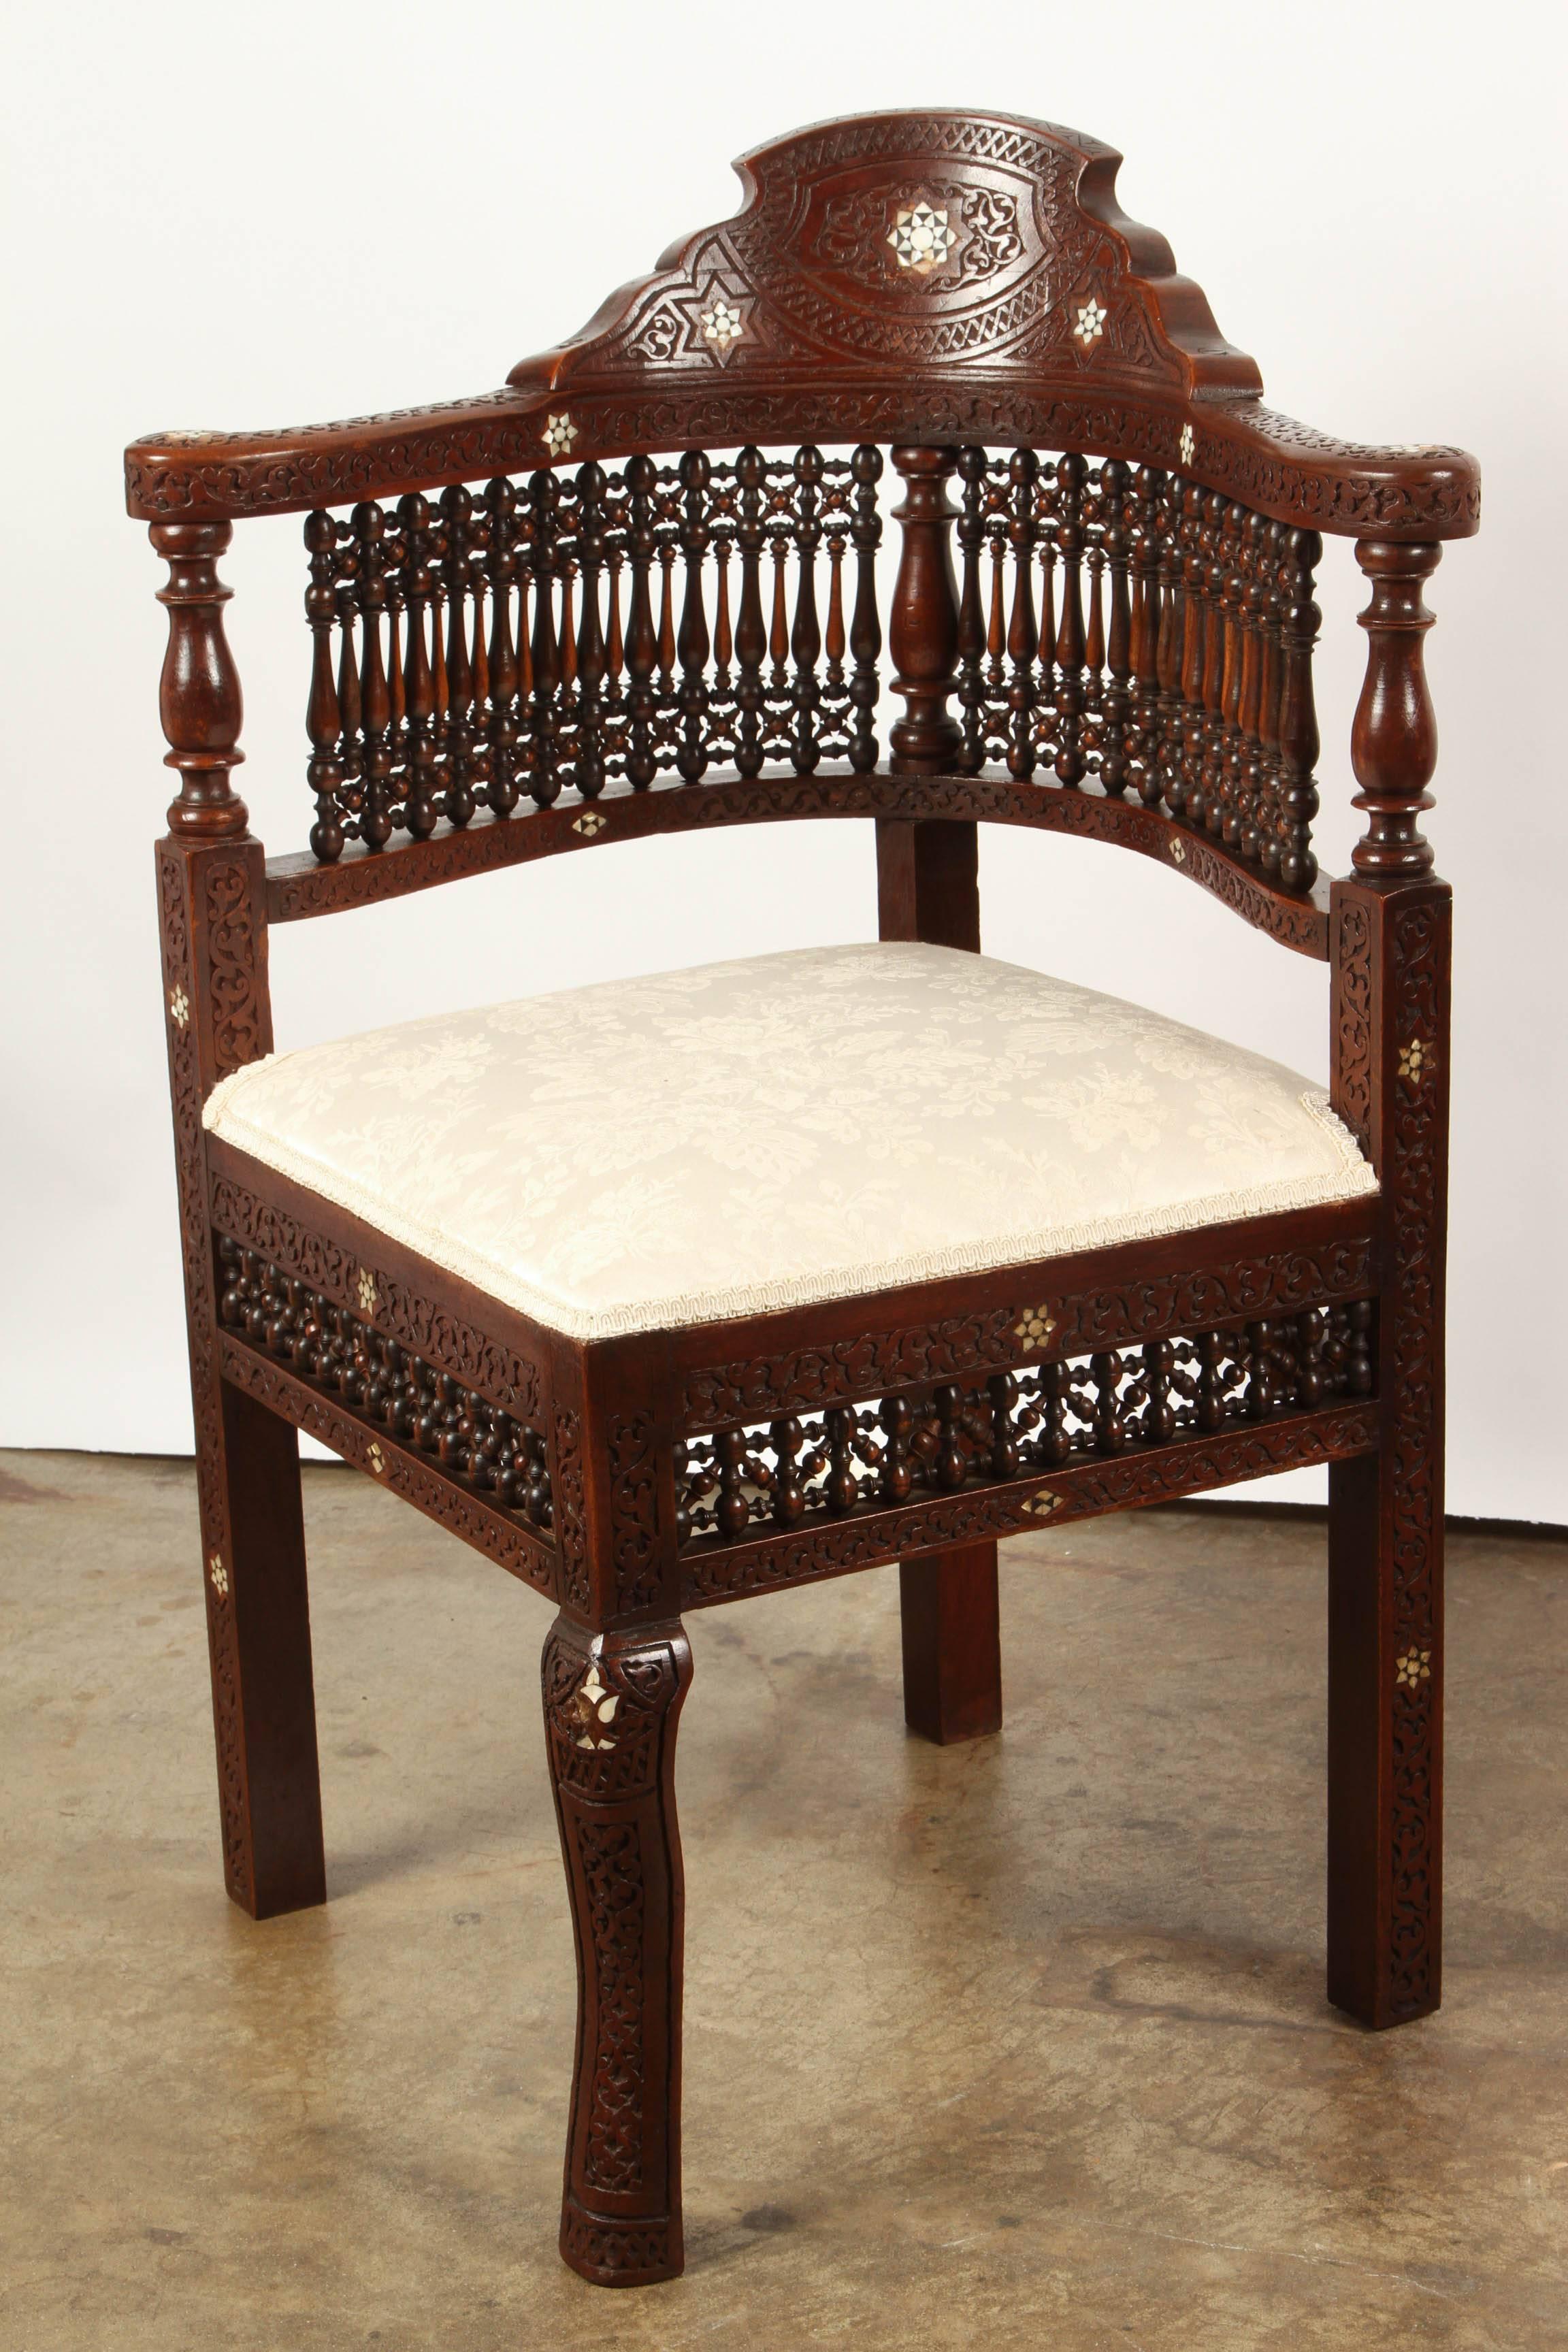 A pair of Moroccan spindle corner chairs, with carved and stained frames. The chairs have rails and arm rests, and the seats are upholstered in silk.The backs of the chairs are composed of a series of decorative spindles and are topped with a number